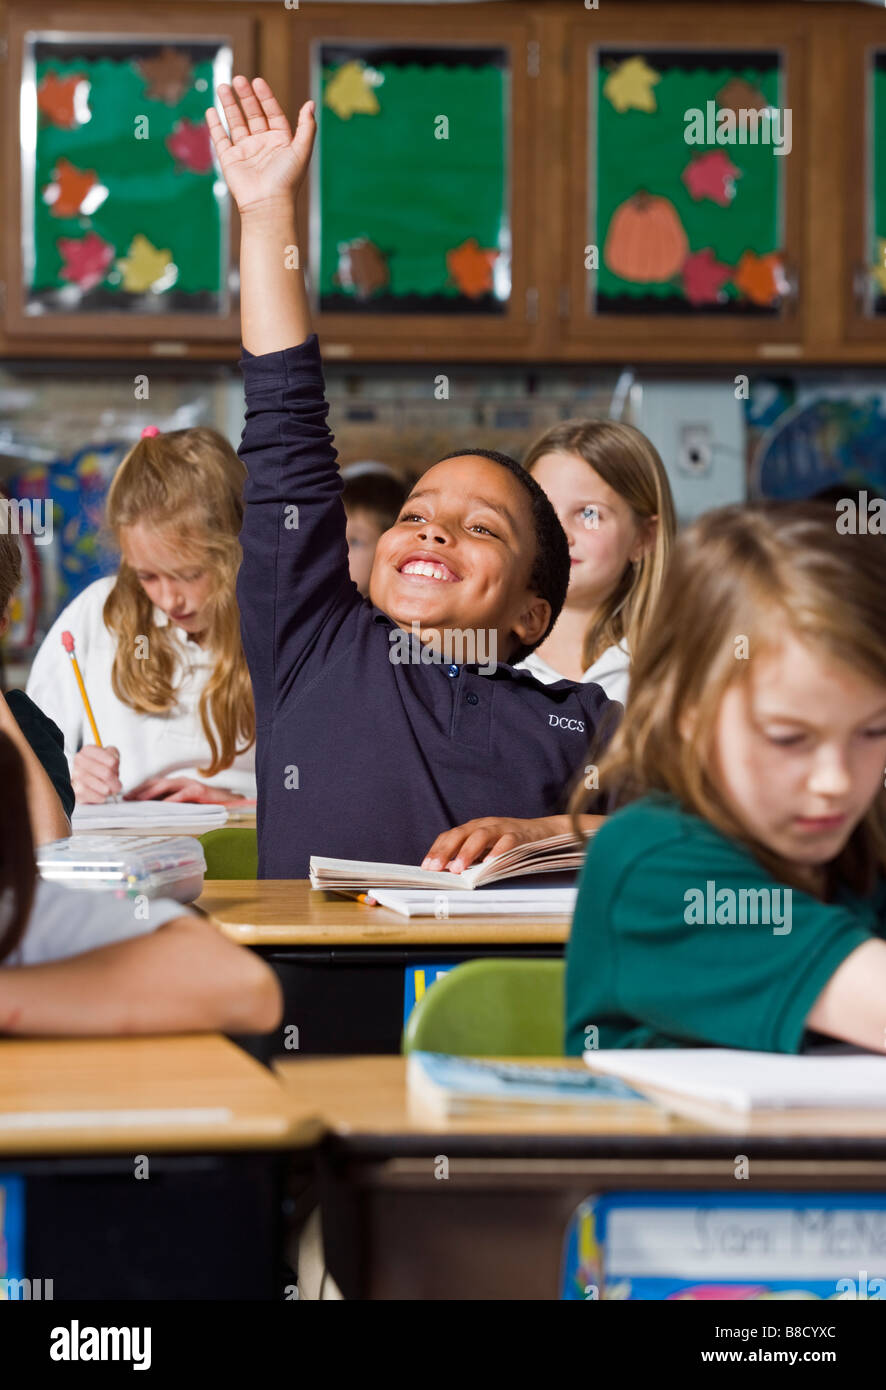 Private elementary school classroom with students Stock Photo